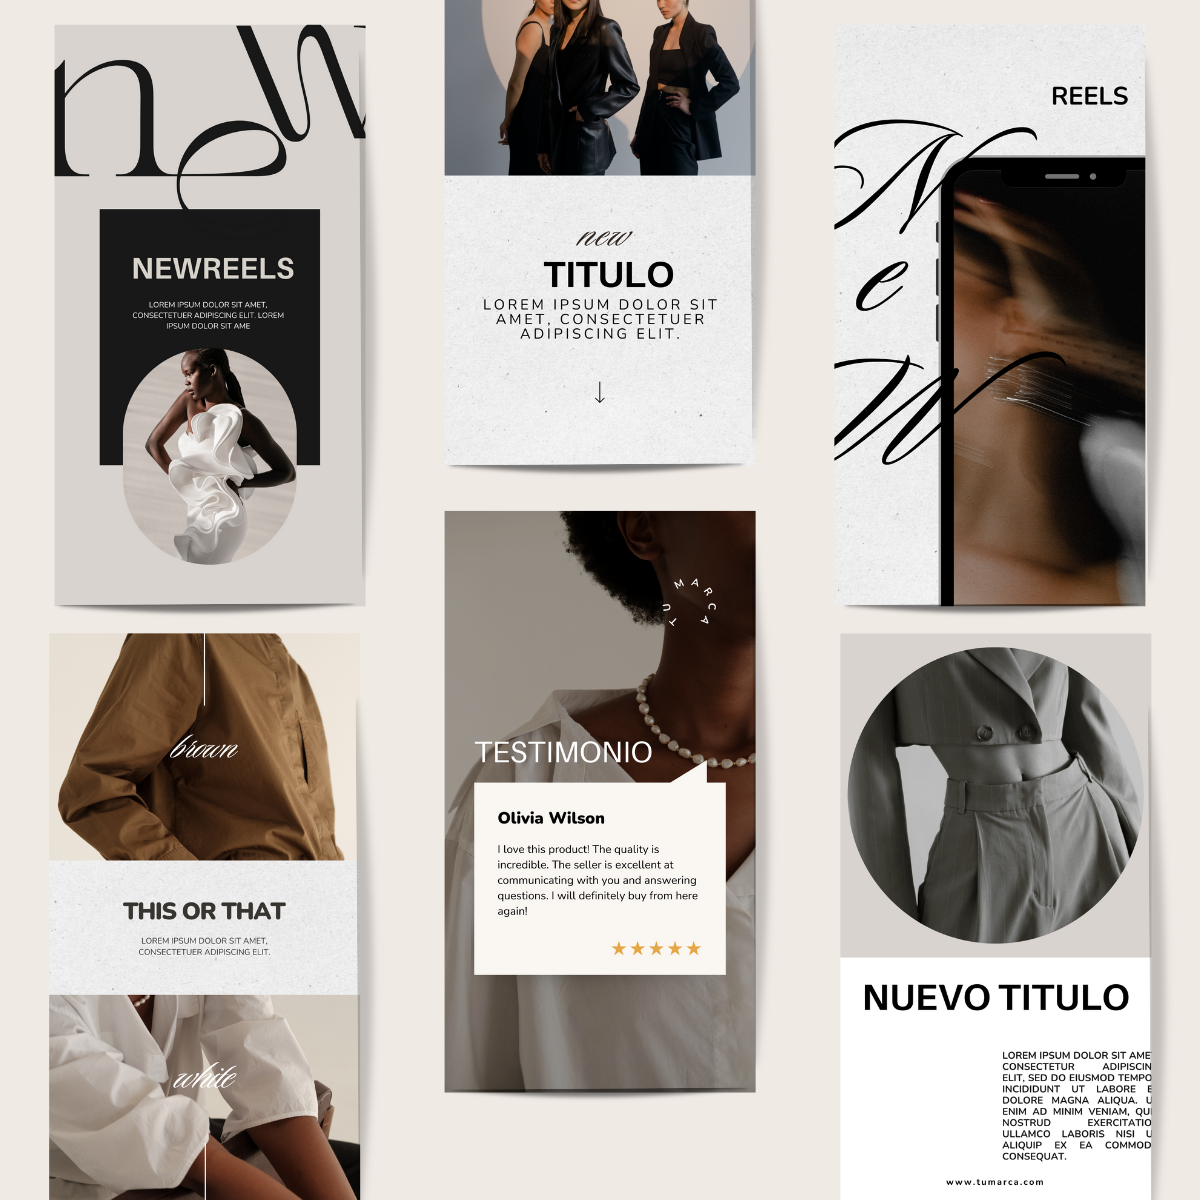 Pack PRO BOSS templates para redes sociales